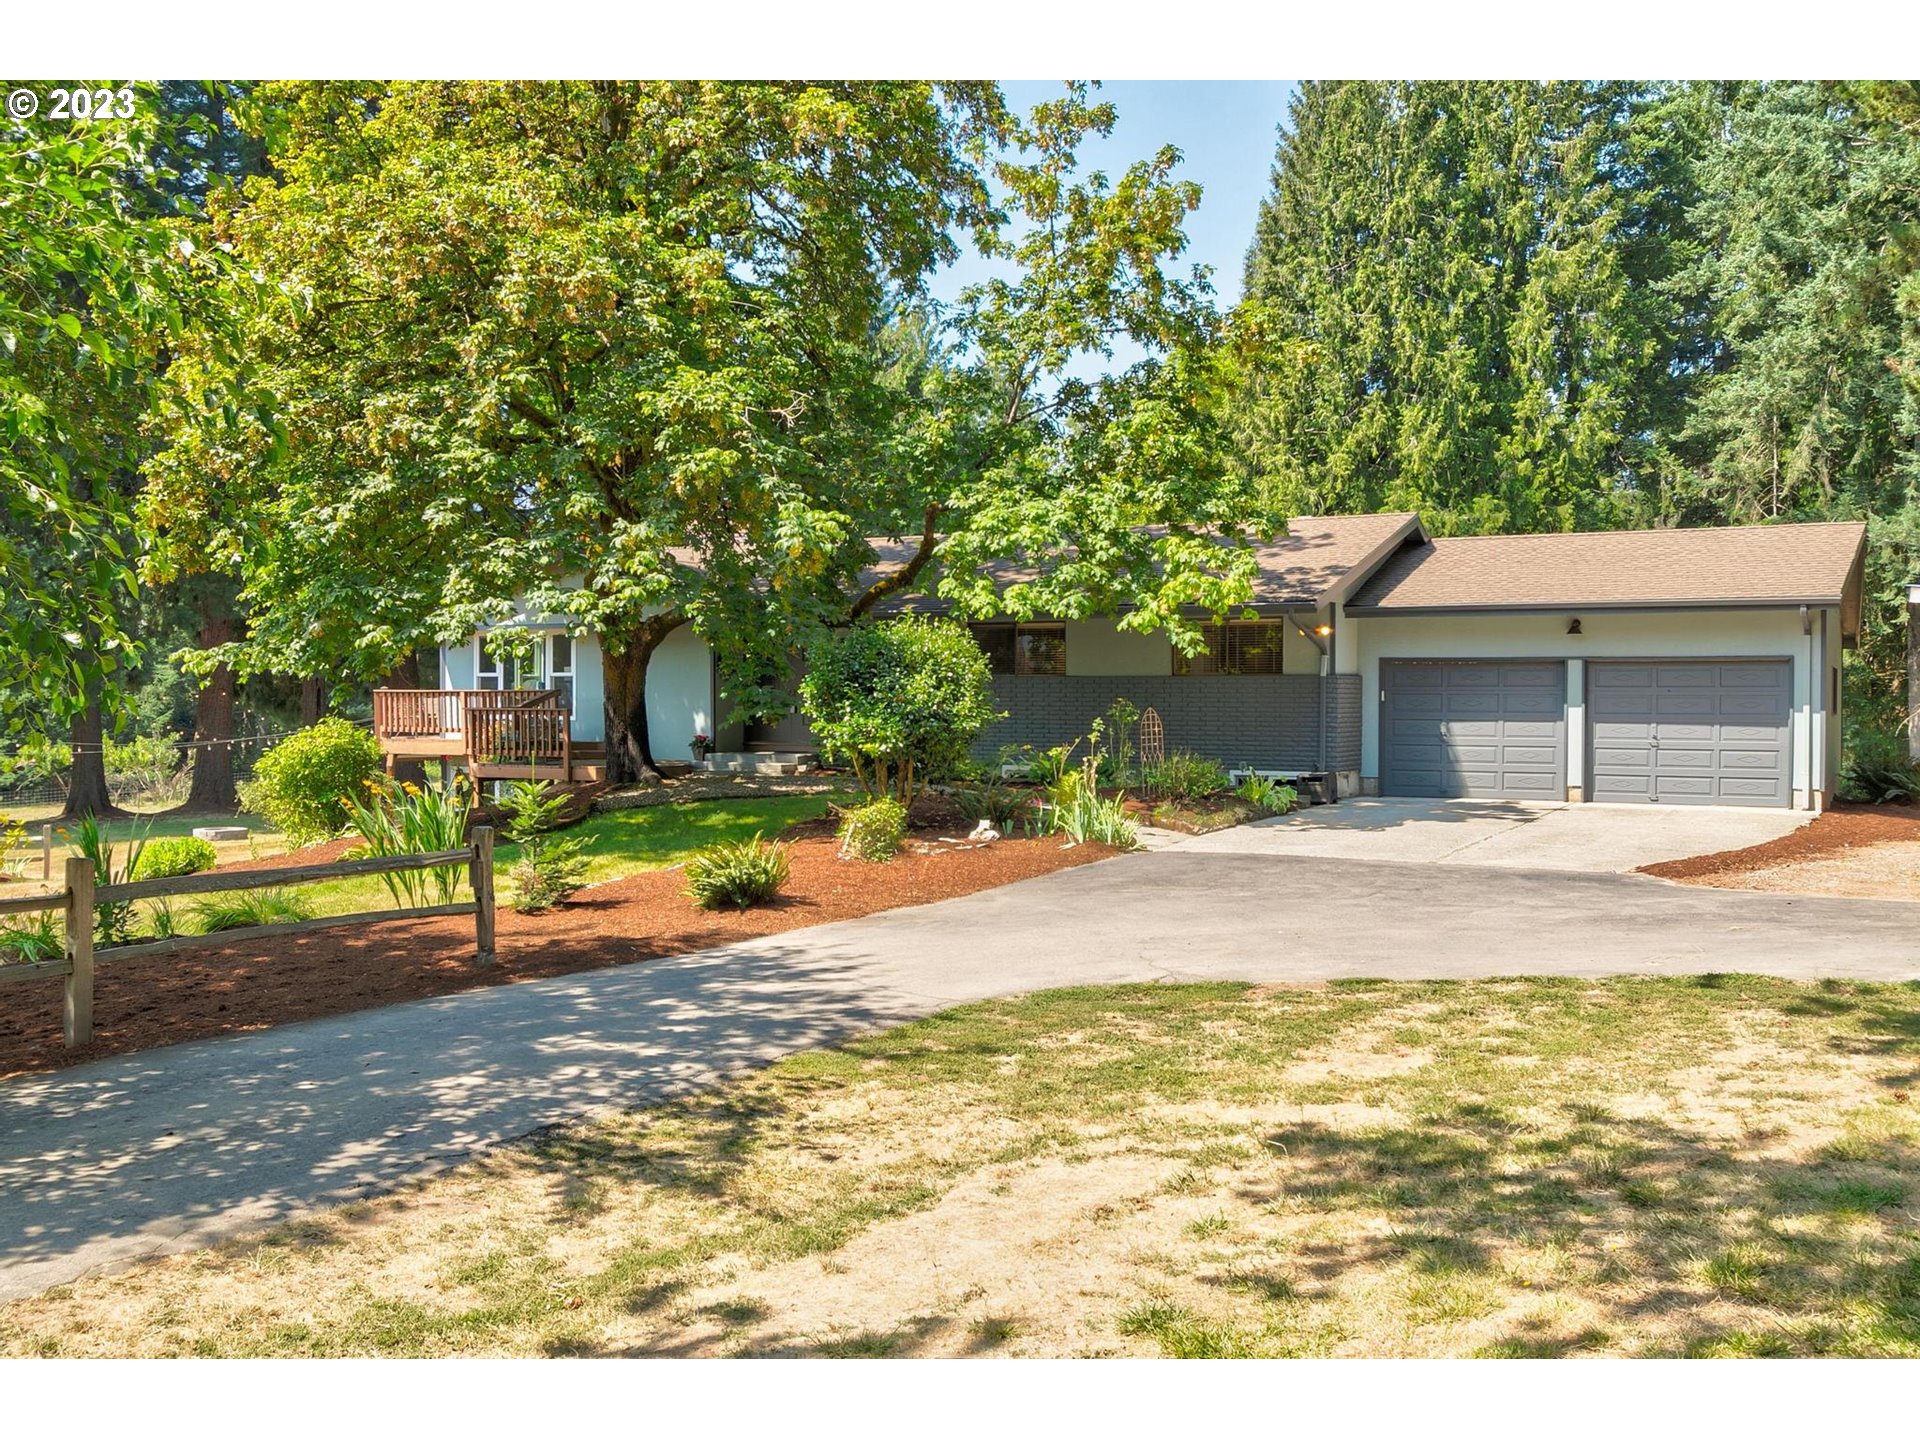 20721 S MAY RD, Oregon City, OR 97045